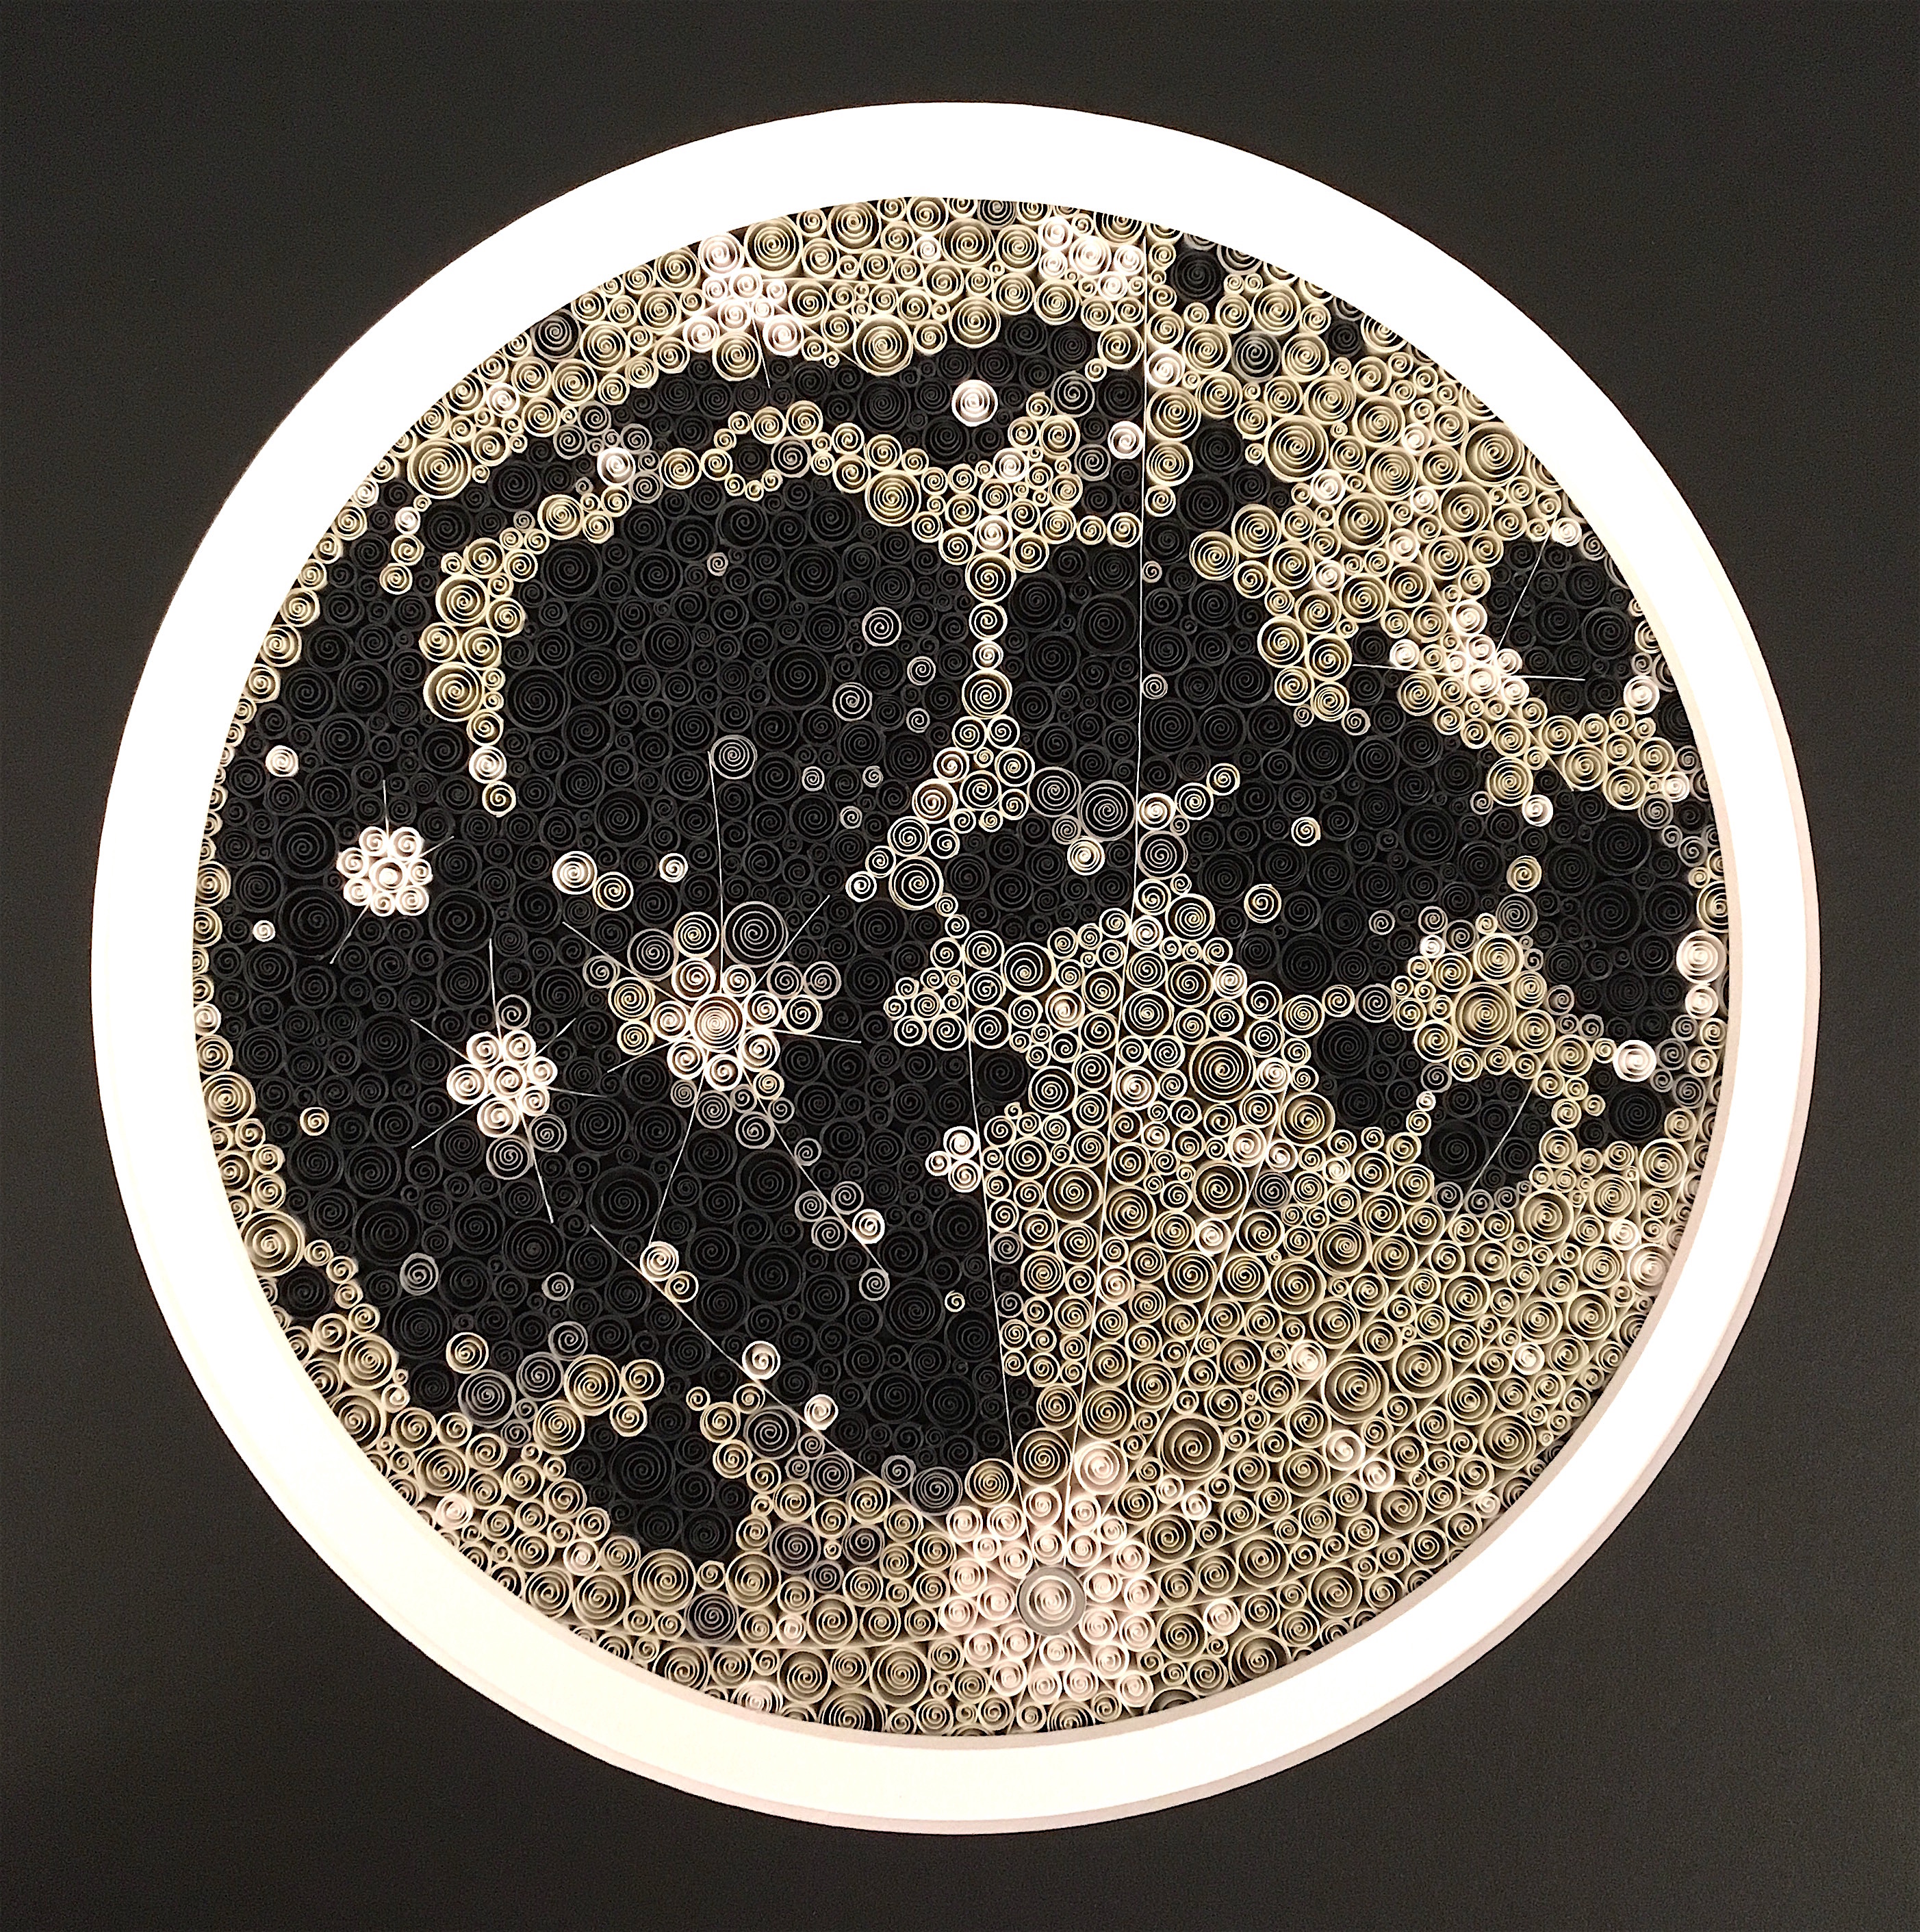 Paper quilled version of the full Moon composed of 2000 small coils of paper in shades of grey.